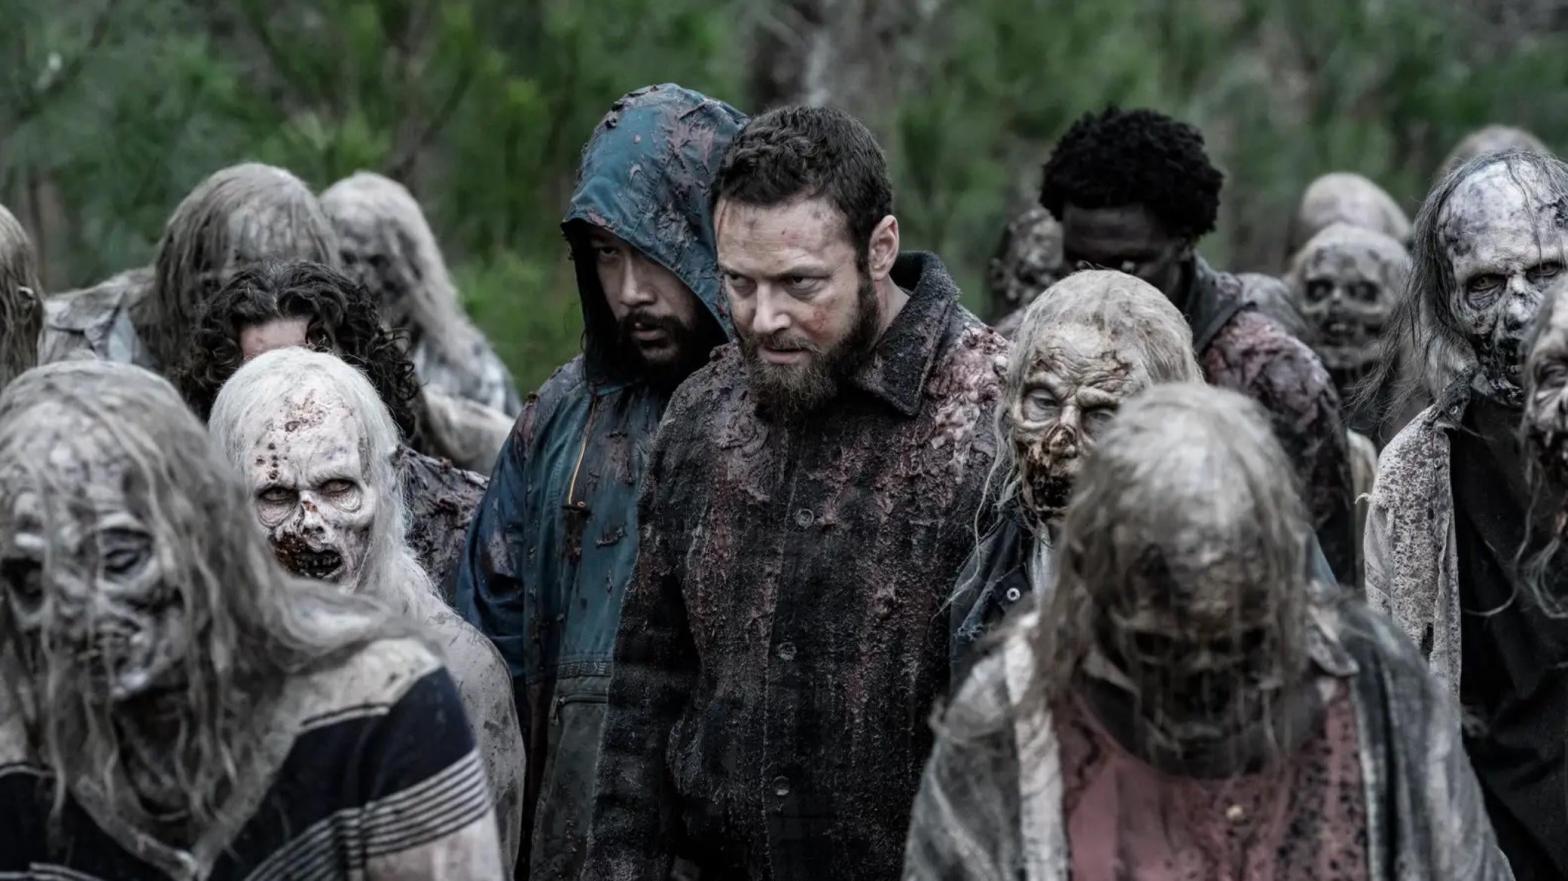 Are these Walking Dead actors or lawsuits? (Image: AMC)